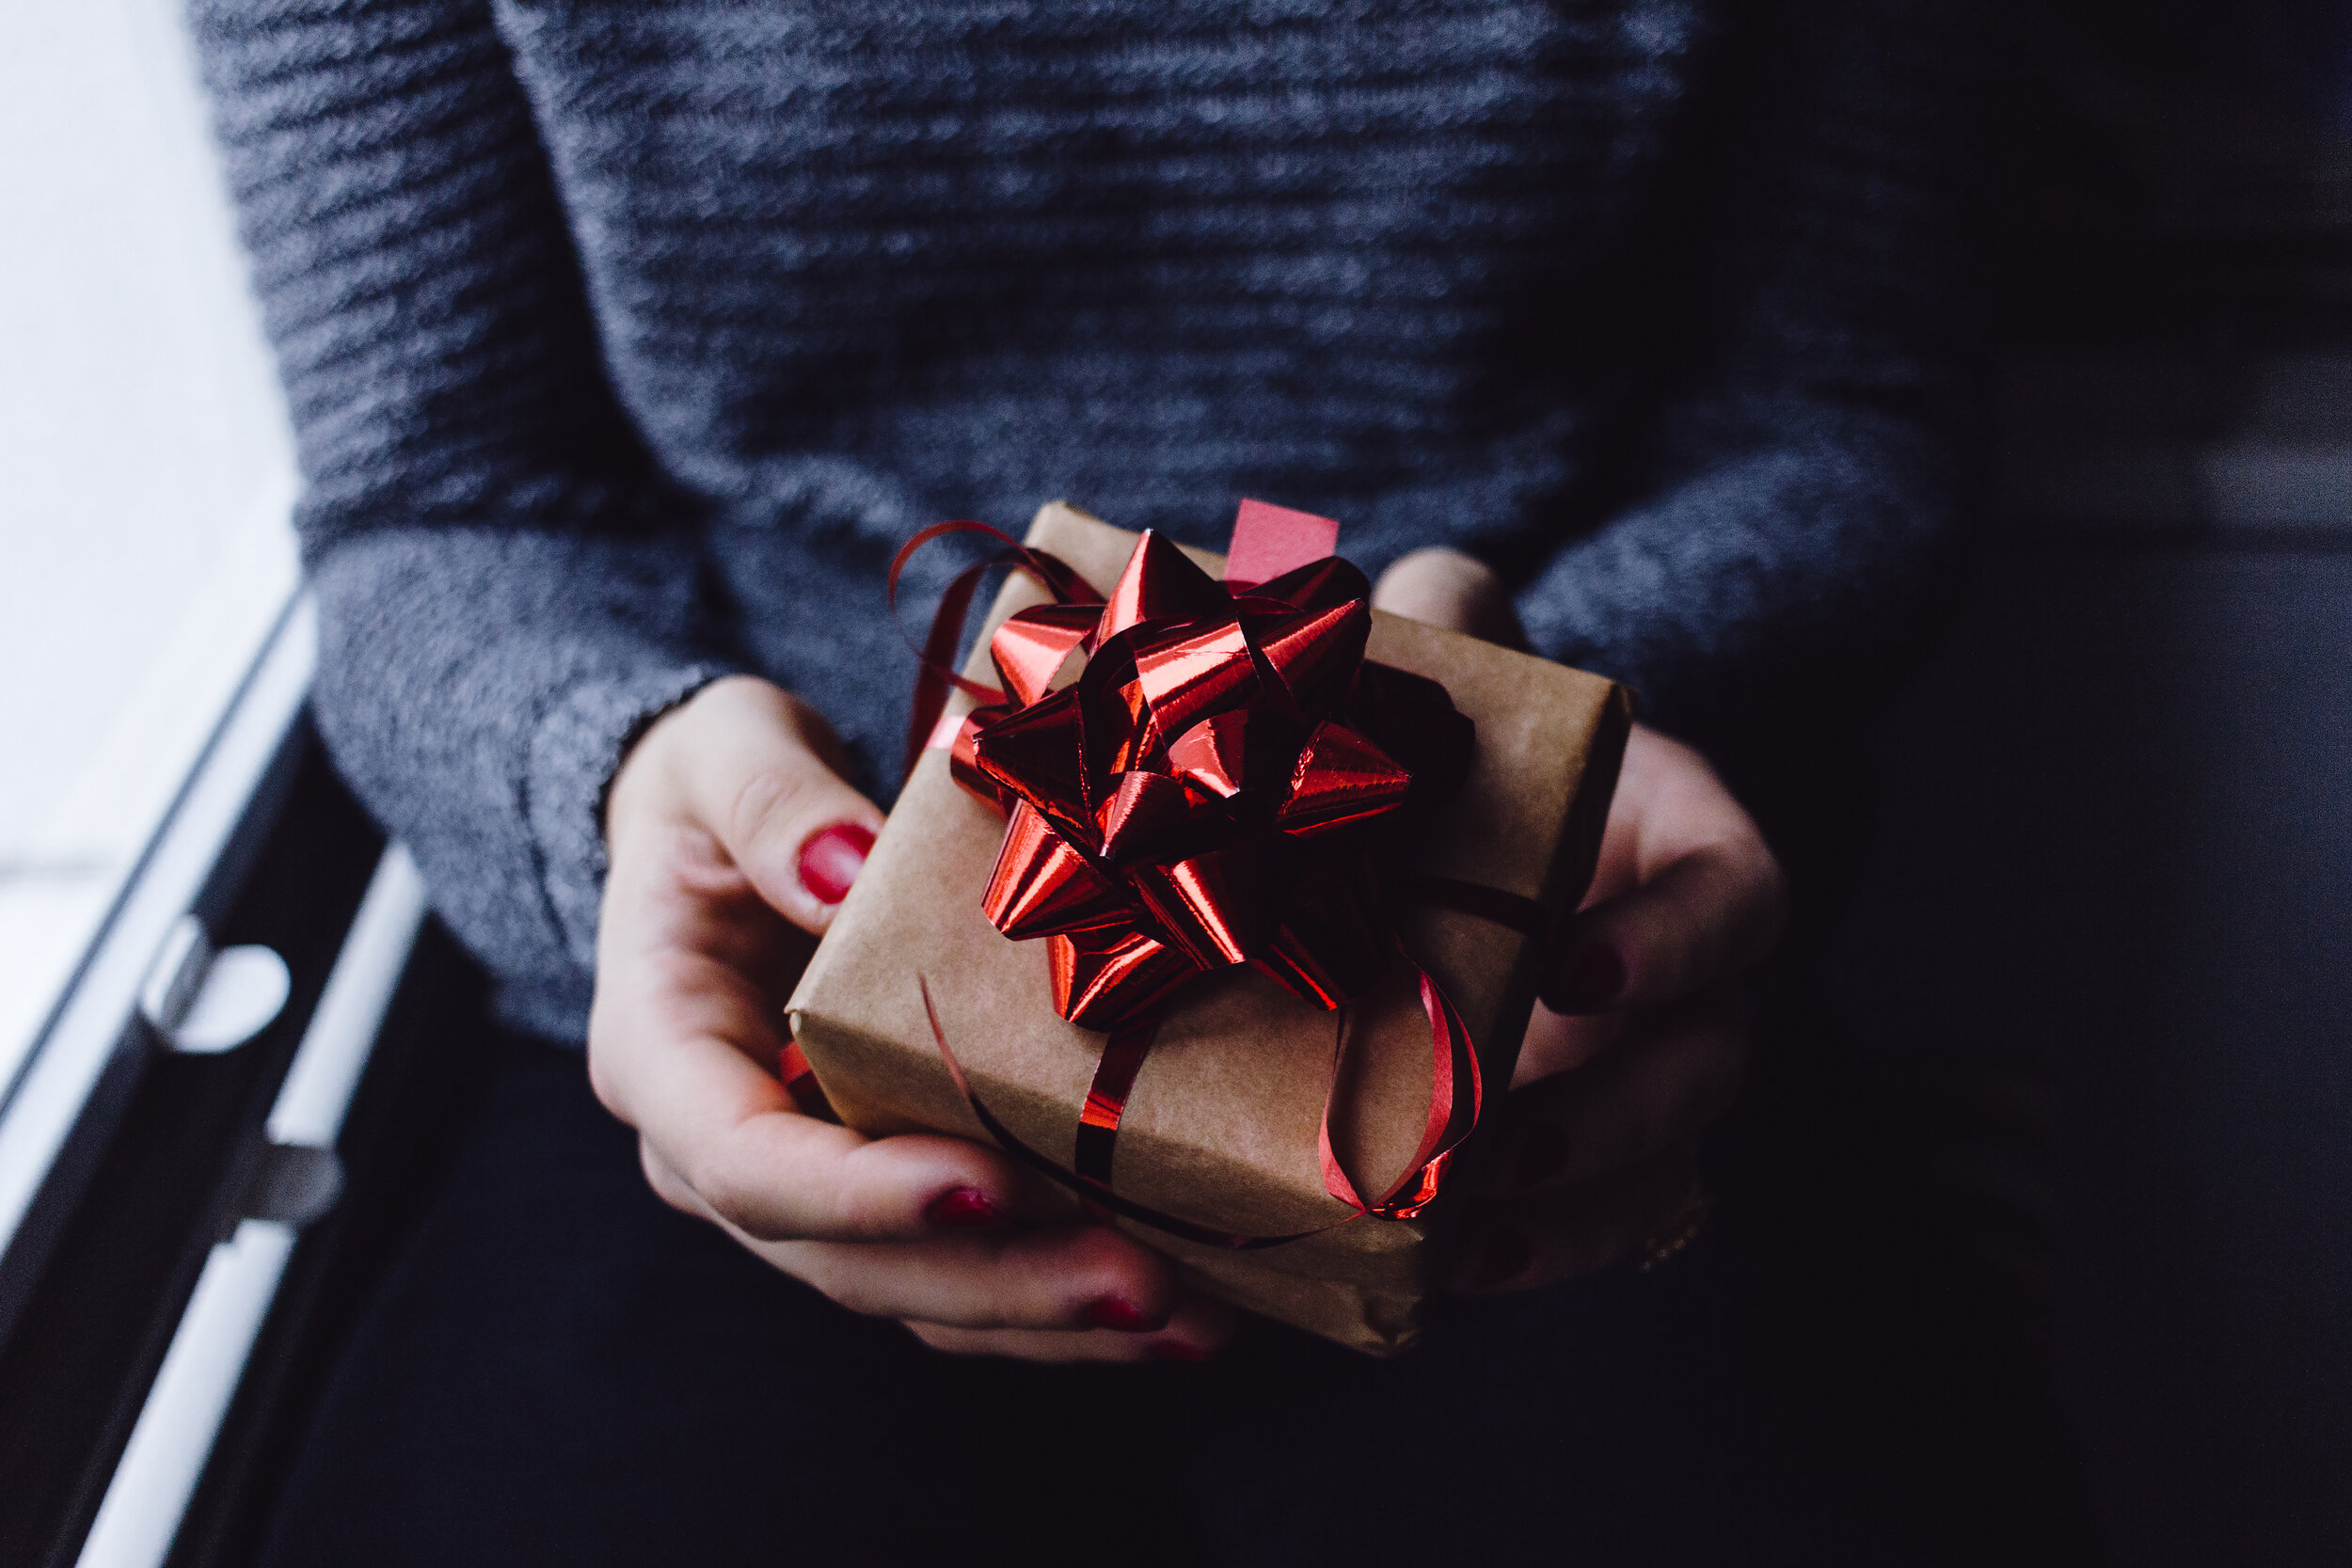 female_holding_a_wrapped_gift.jpg